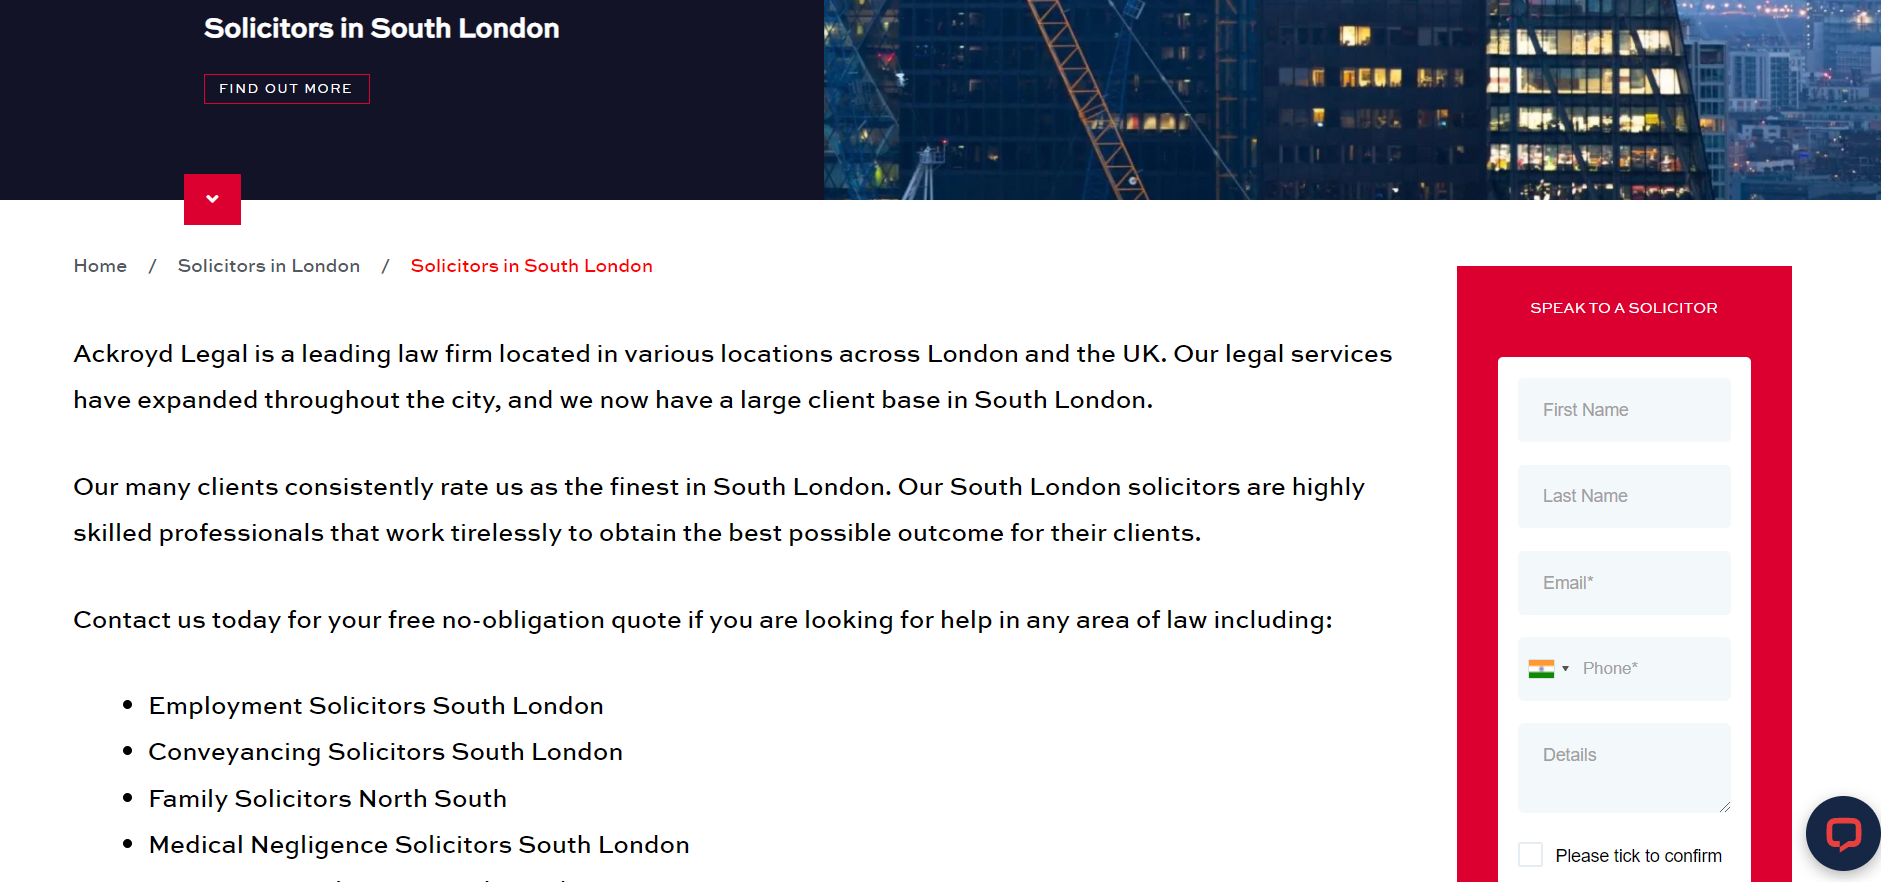 South London Solicitors